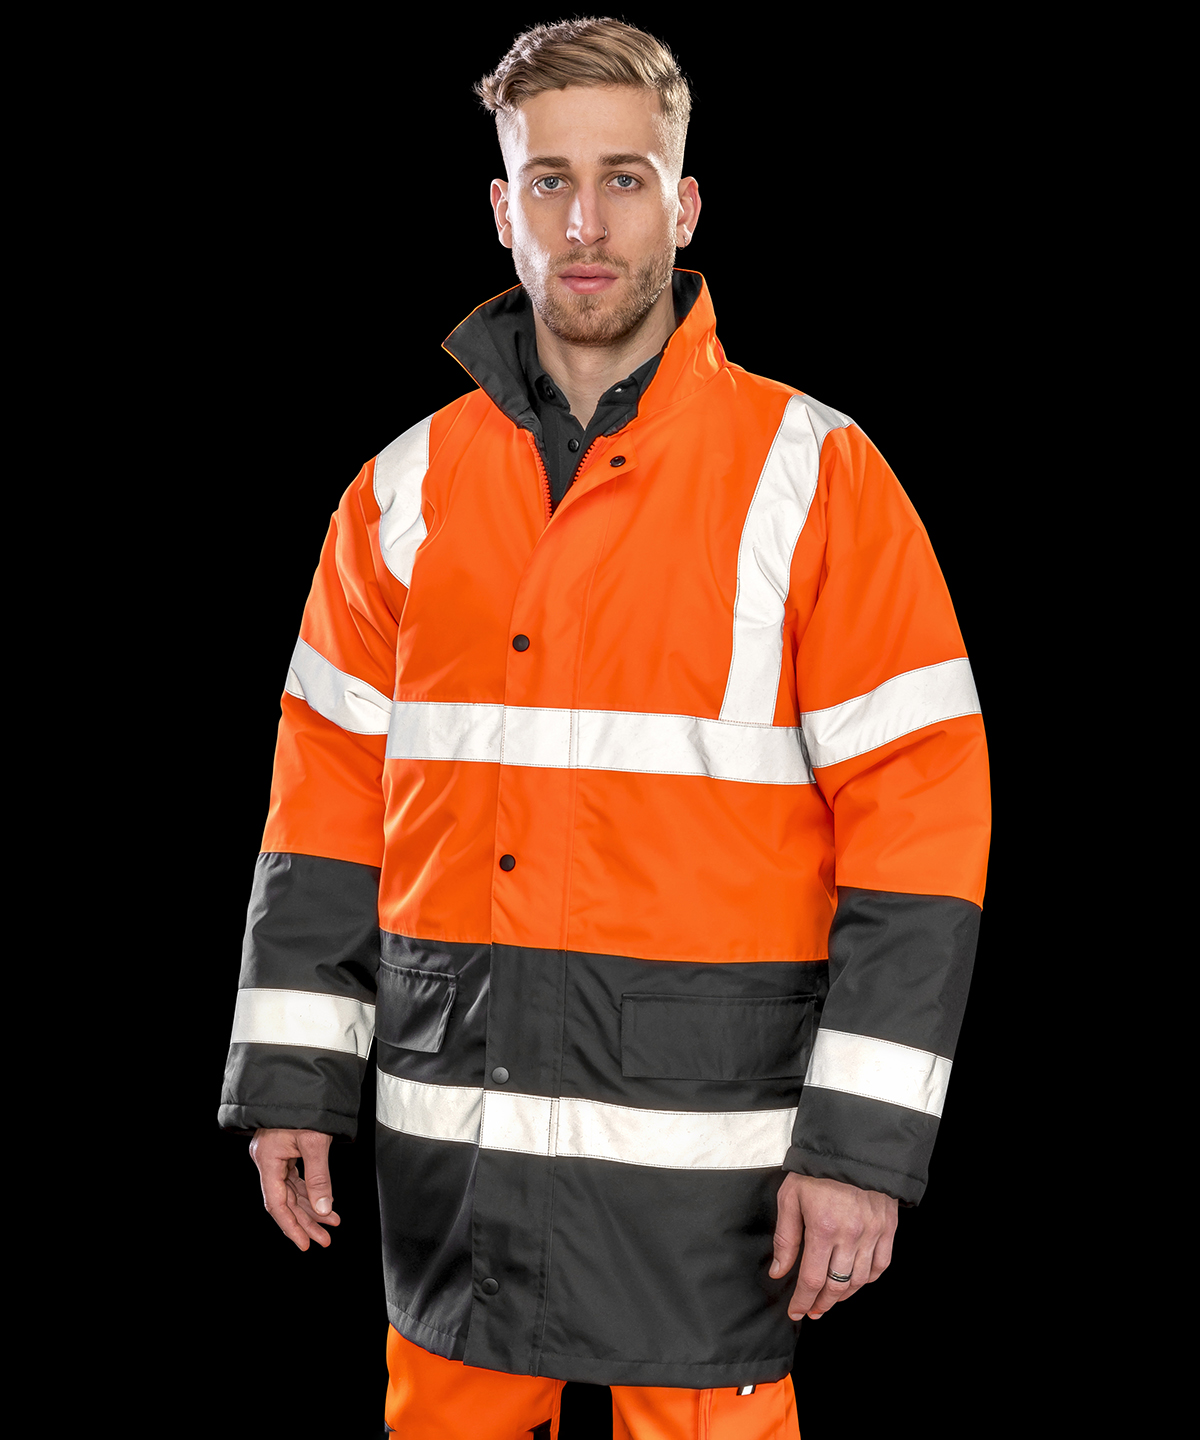 Motorway two-tone safety coat